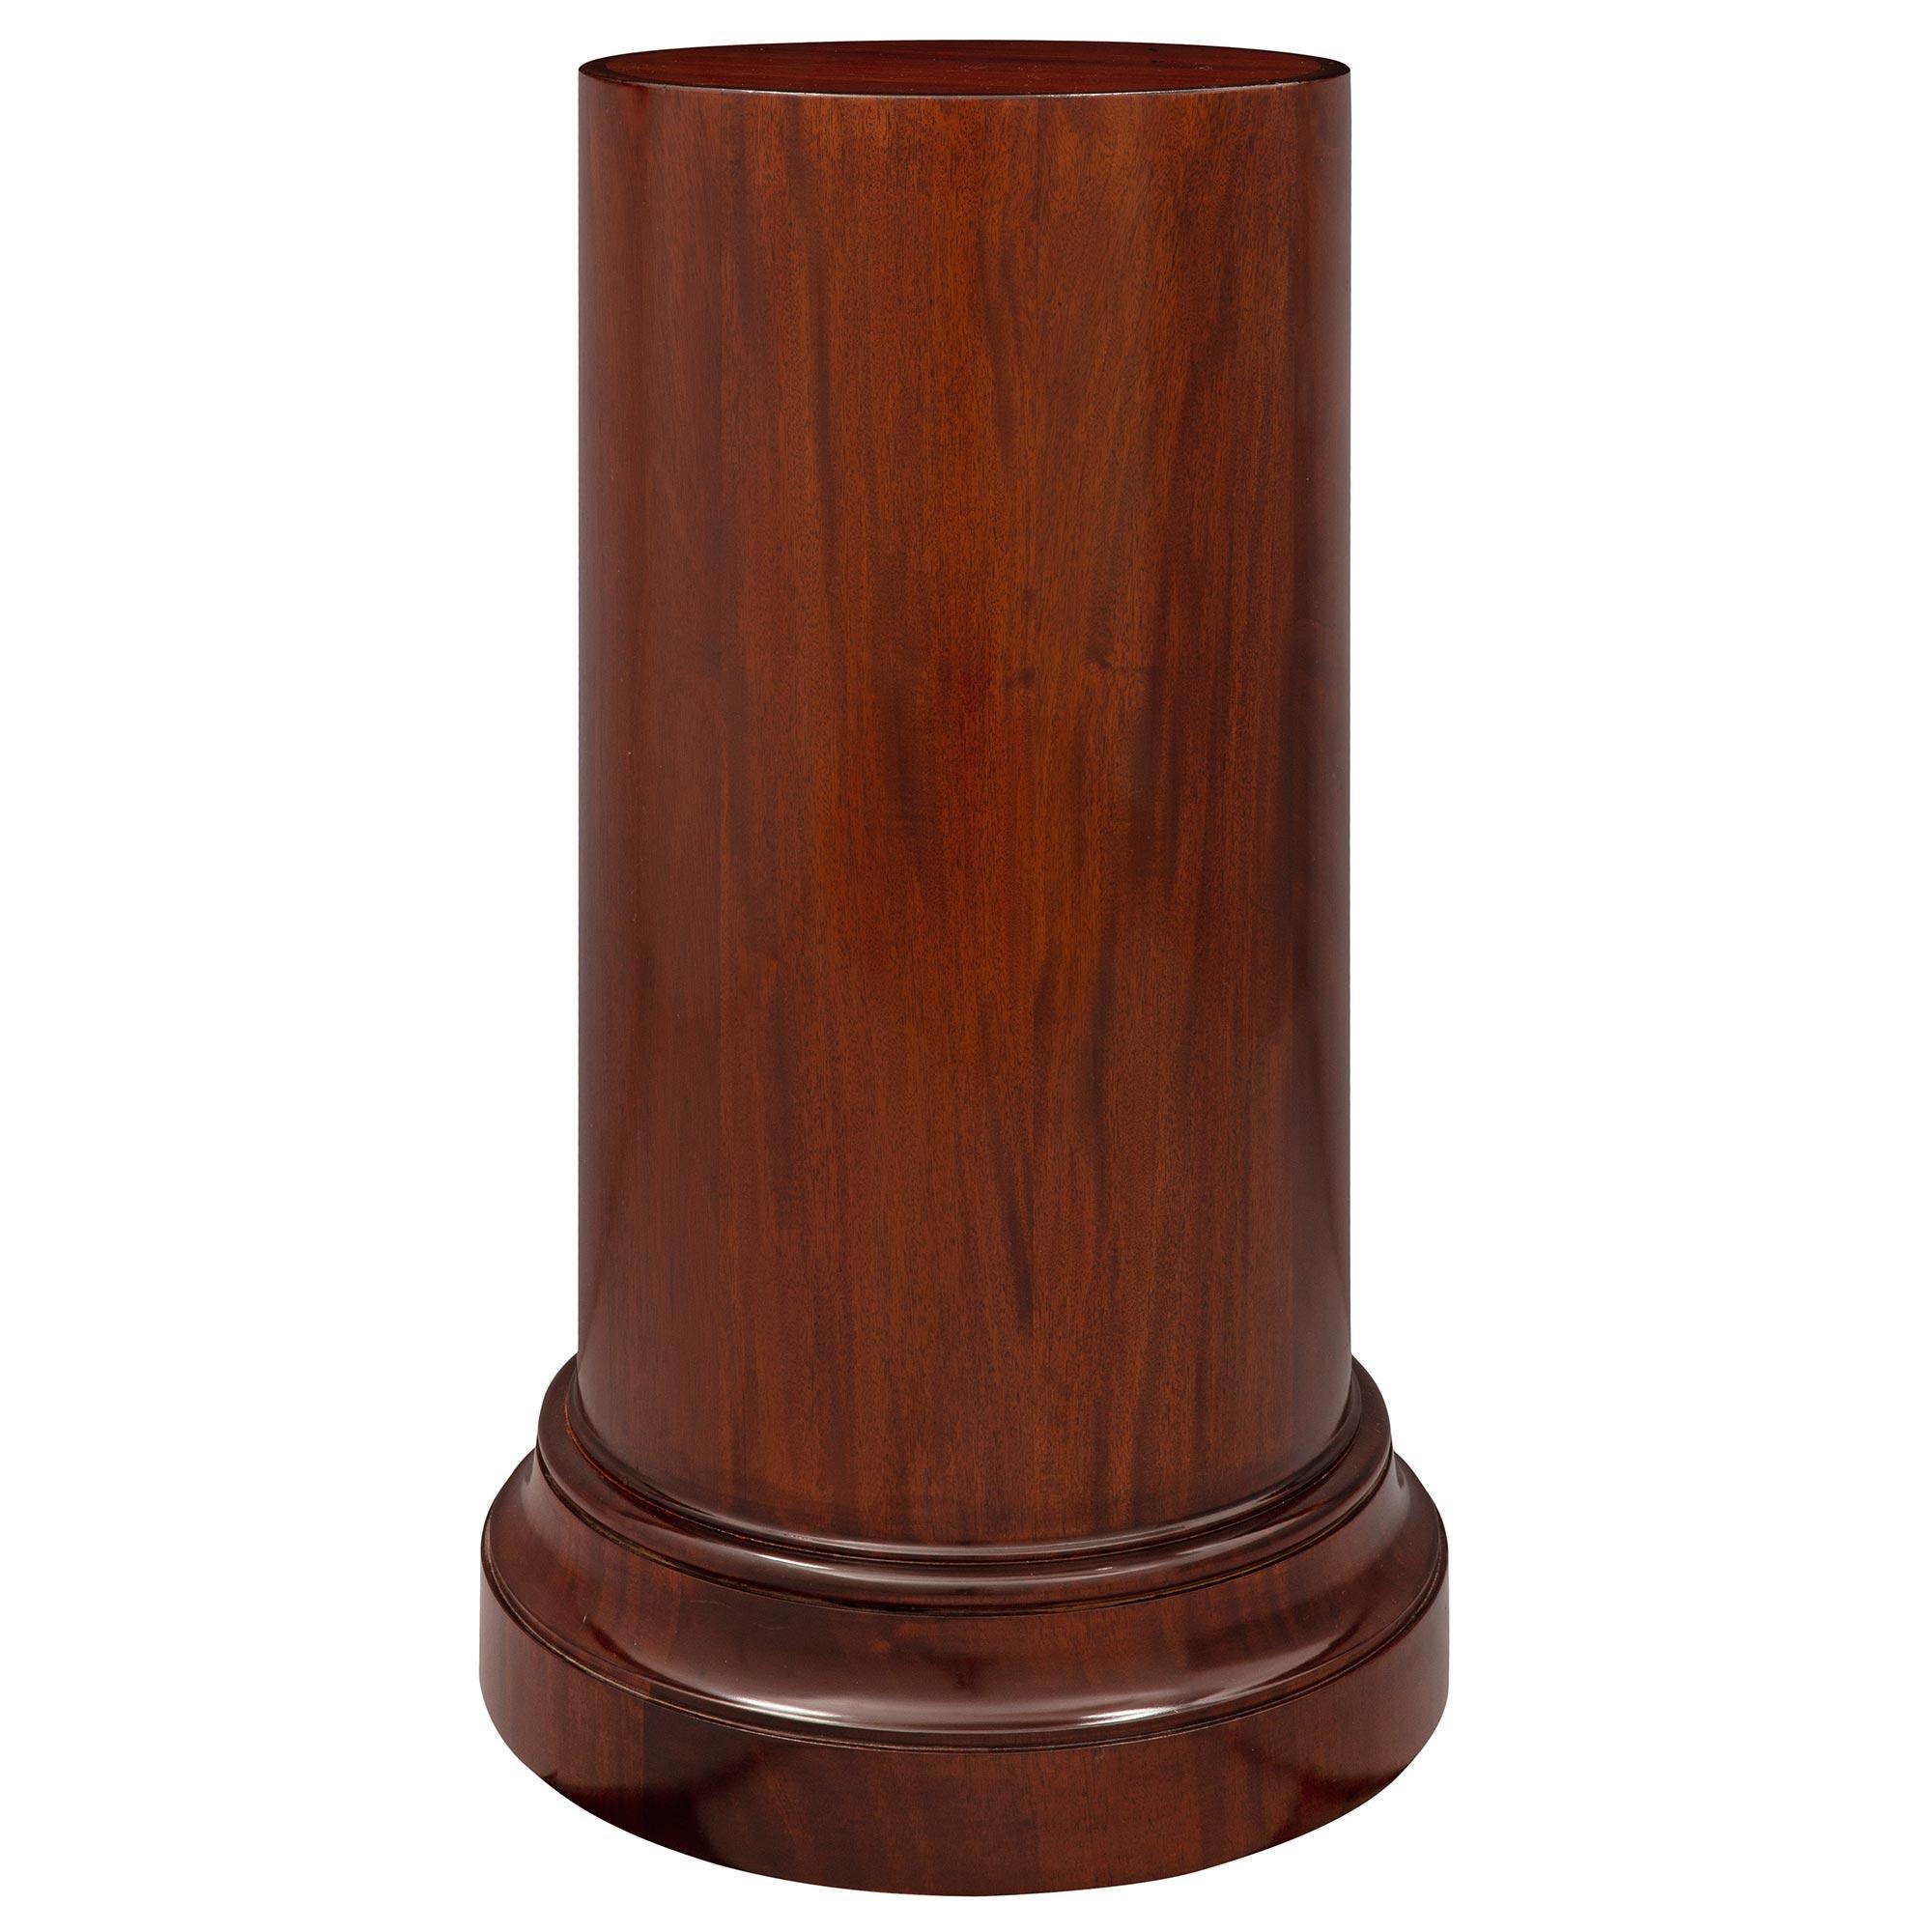 French 19th Century Mahogany Pedestal Column In Good Condition For Sale In West Palm Beach, FL